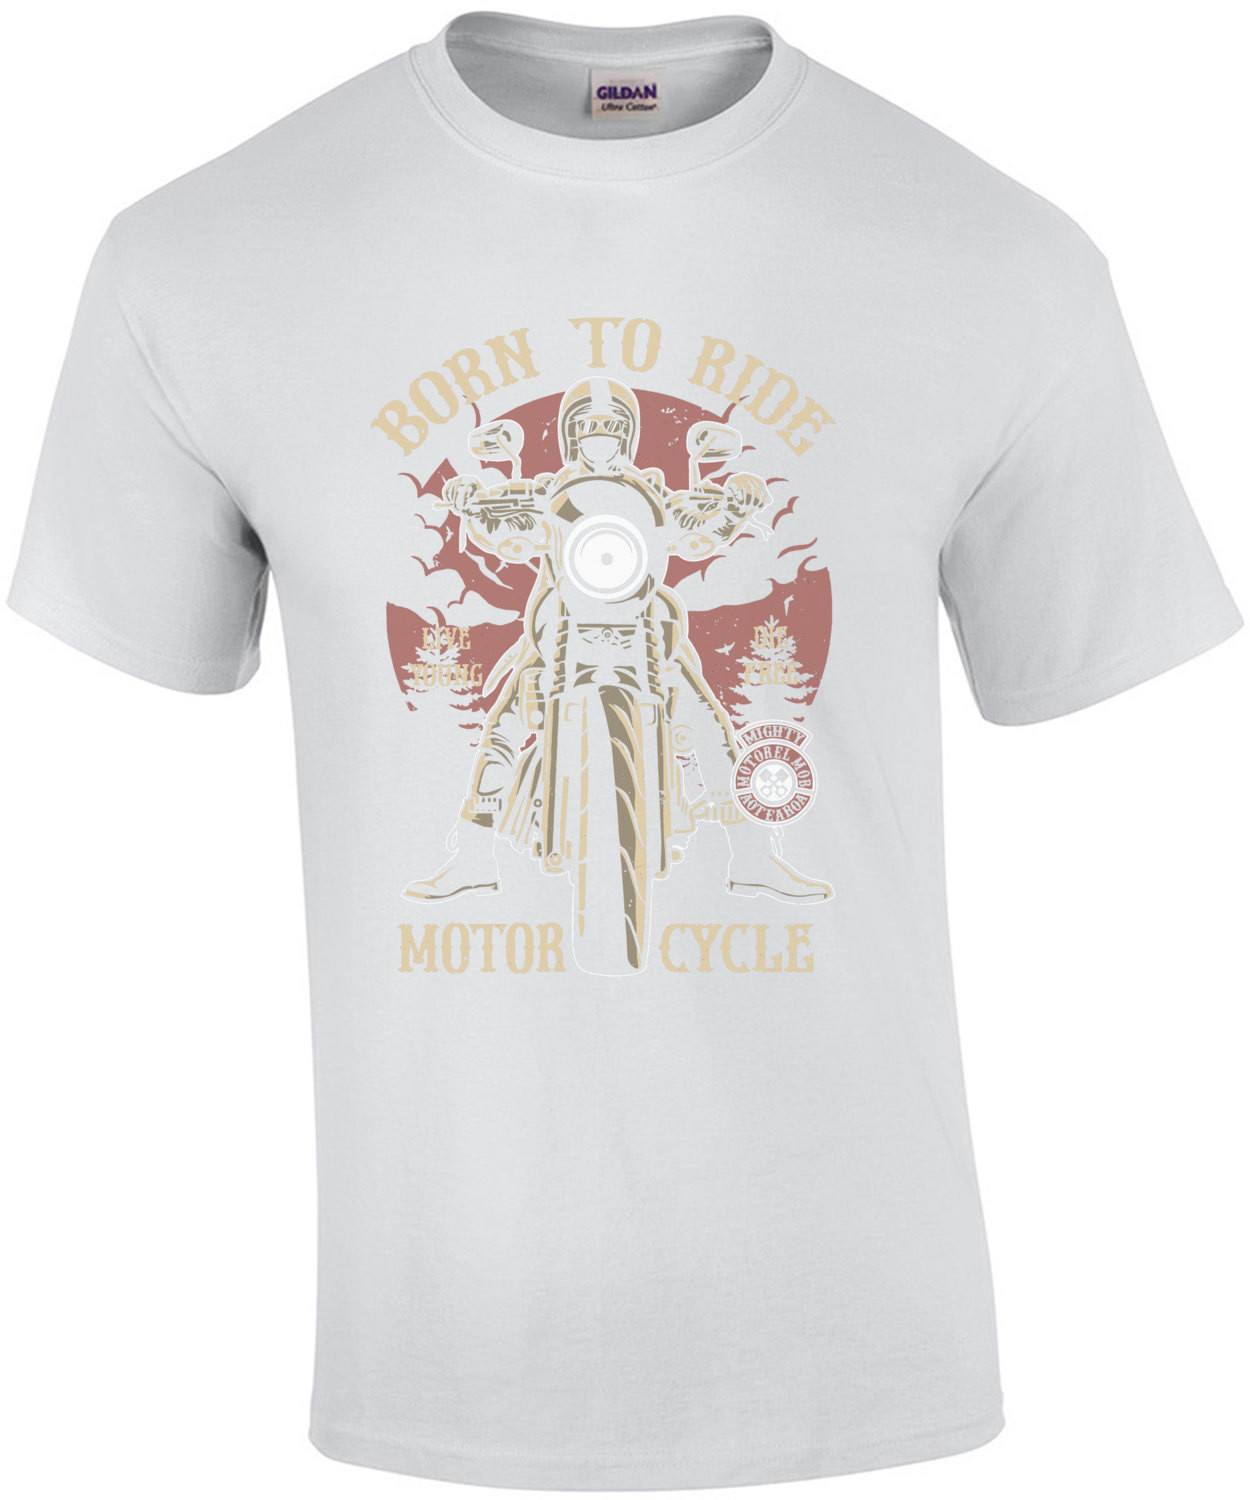 Born To Ride Motorcycle Bikers T-Shirt